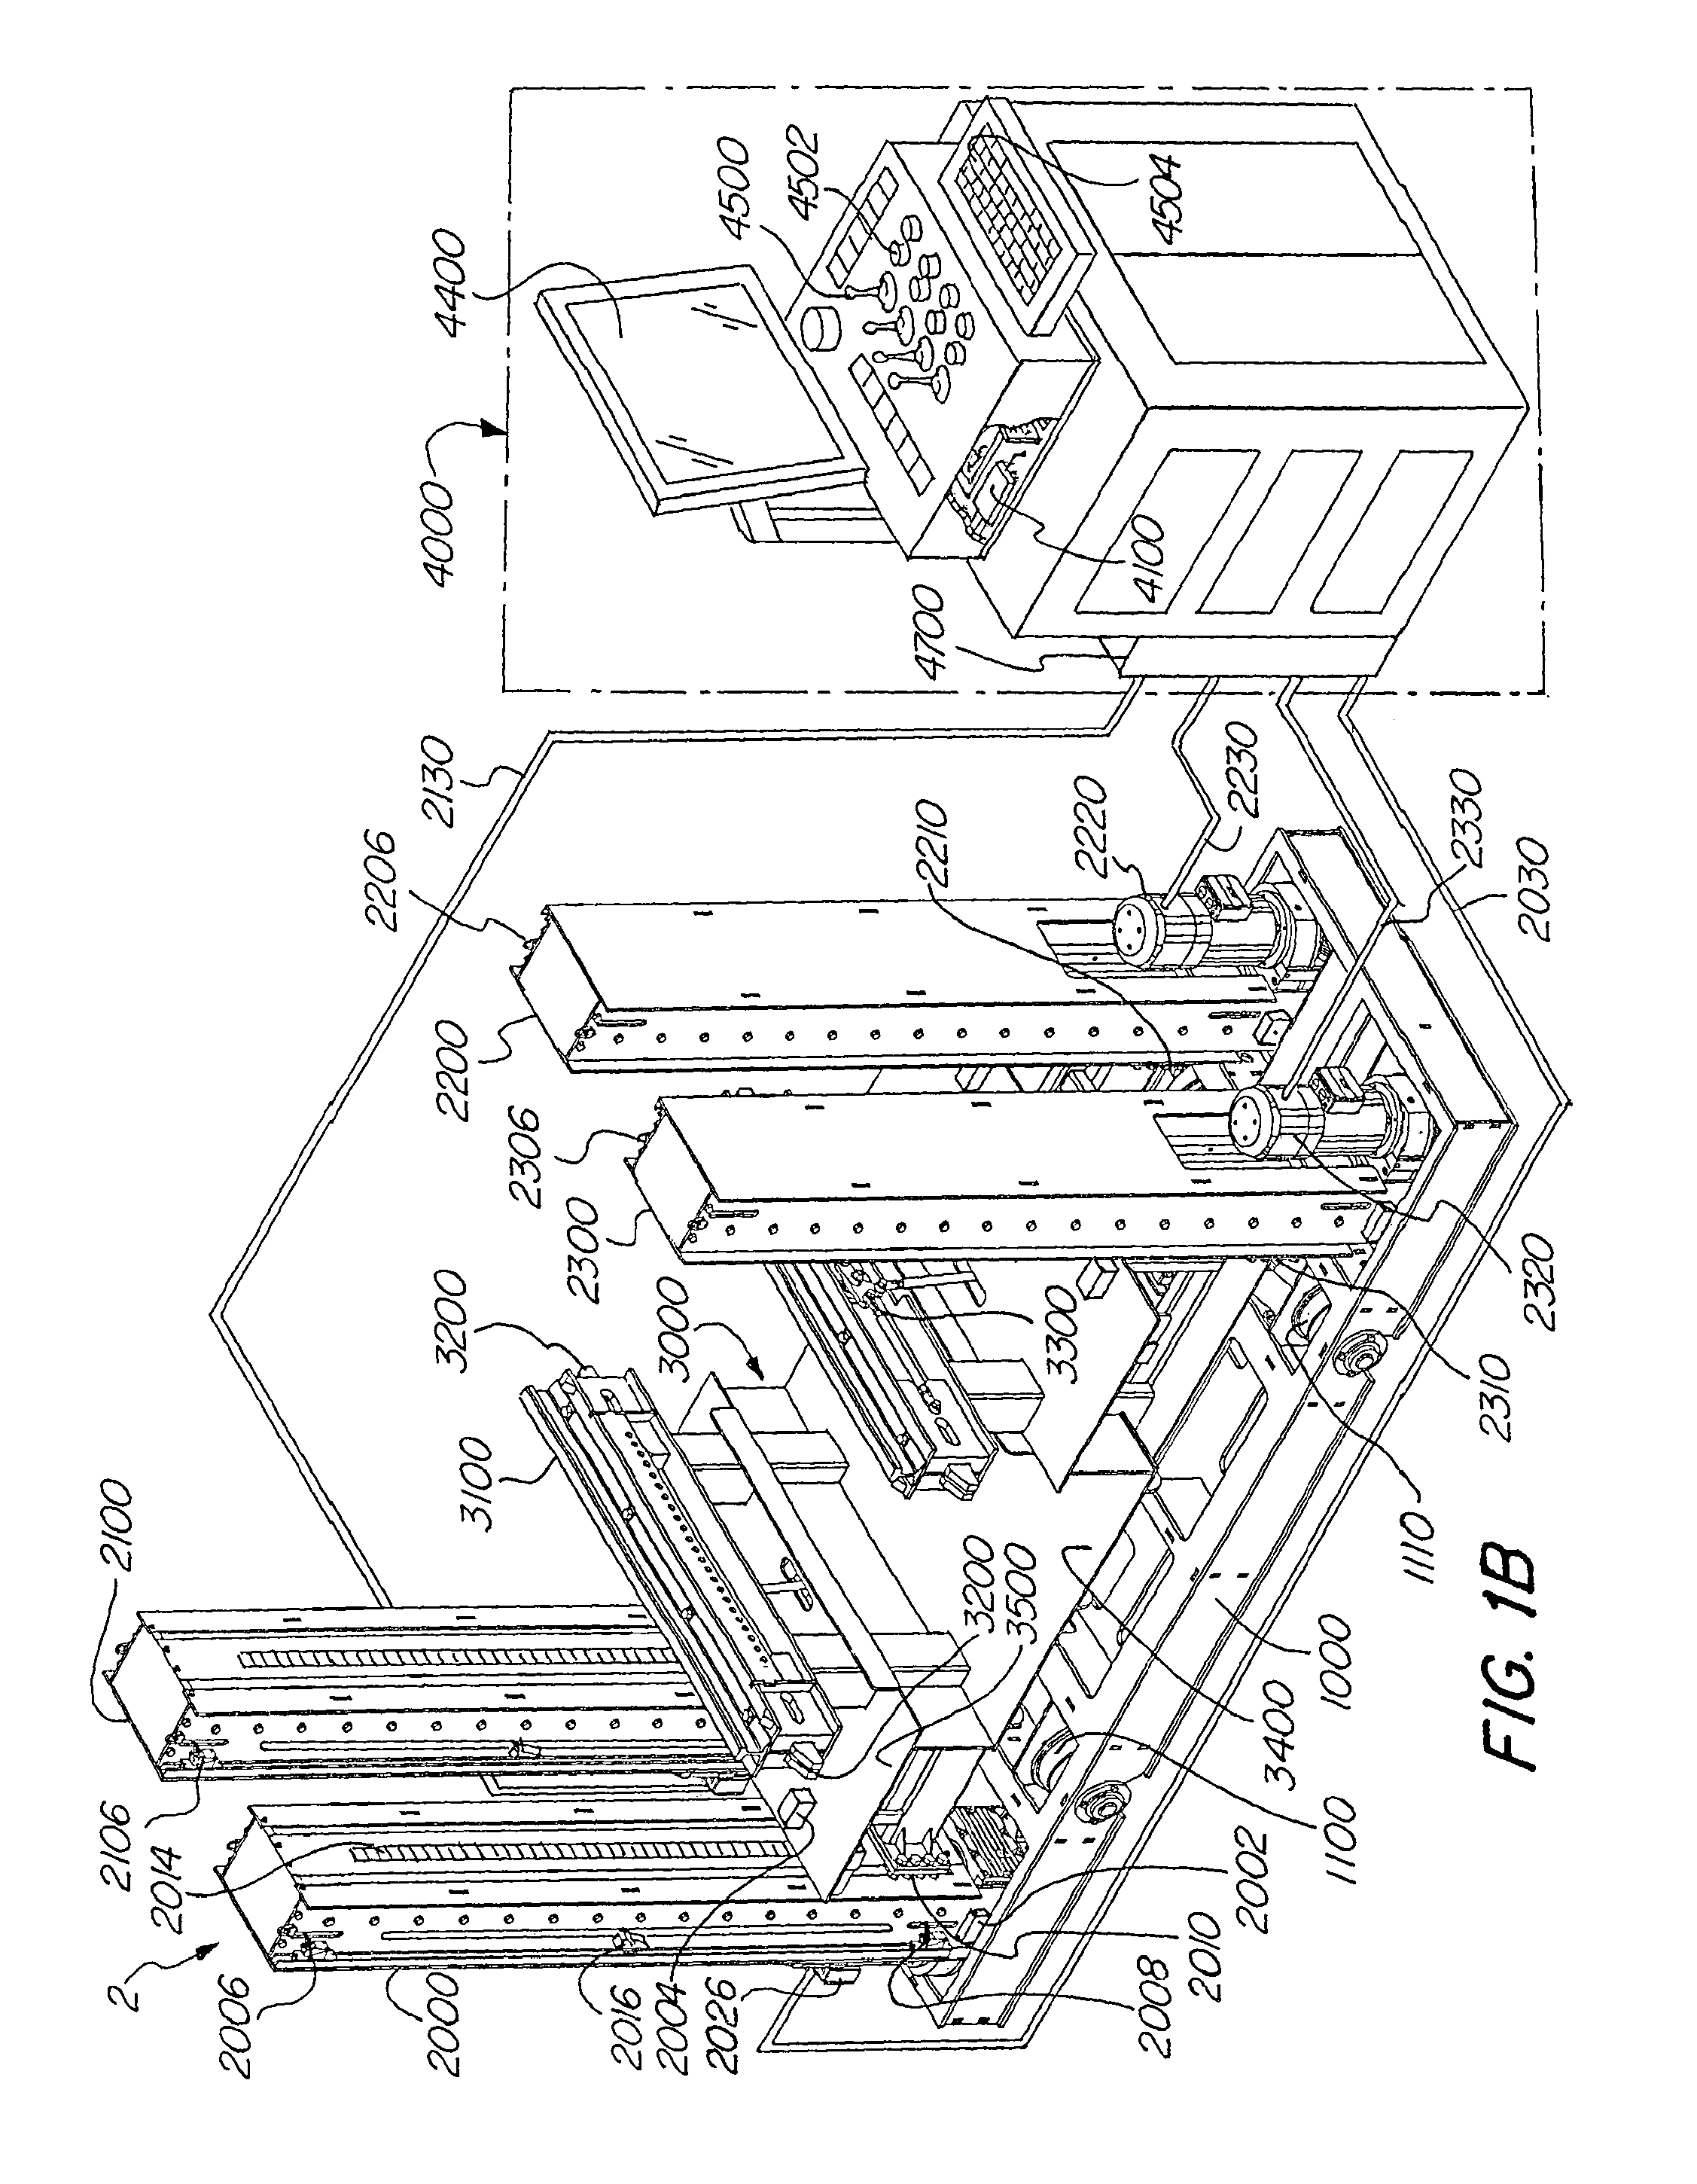 Independent drive motors for machinery positioning apparatus having independent lifting motors